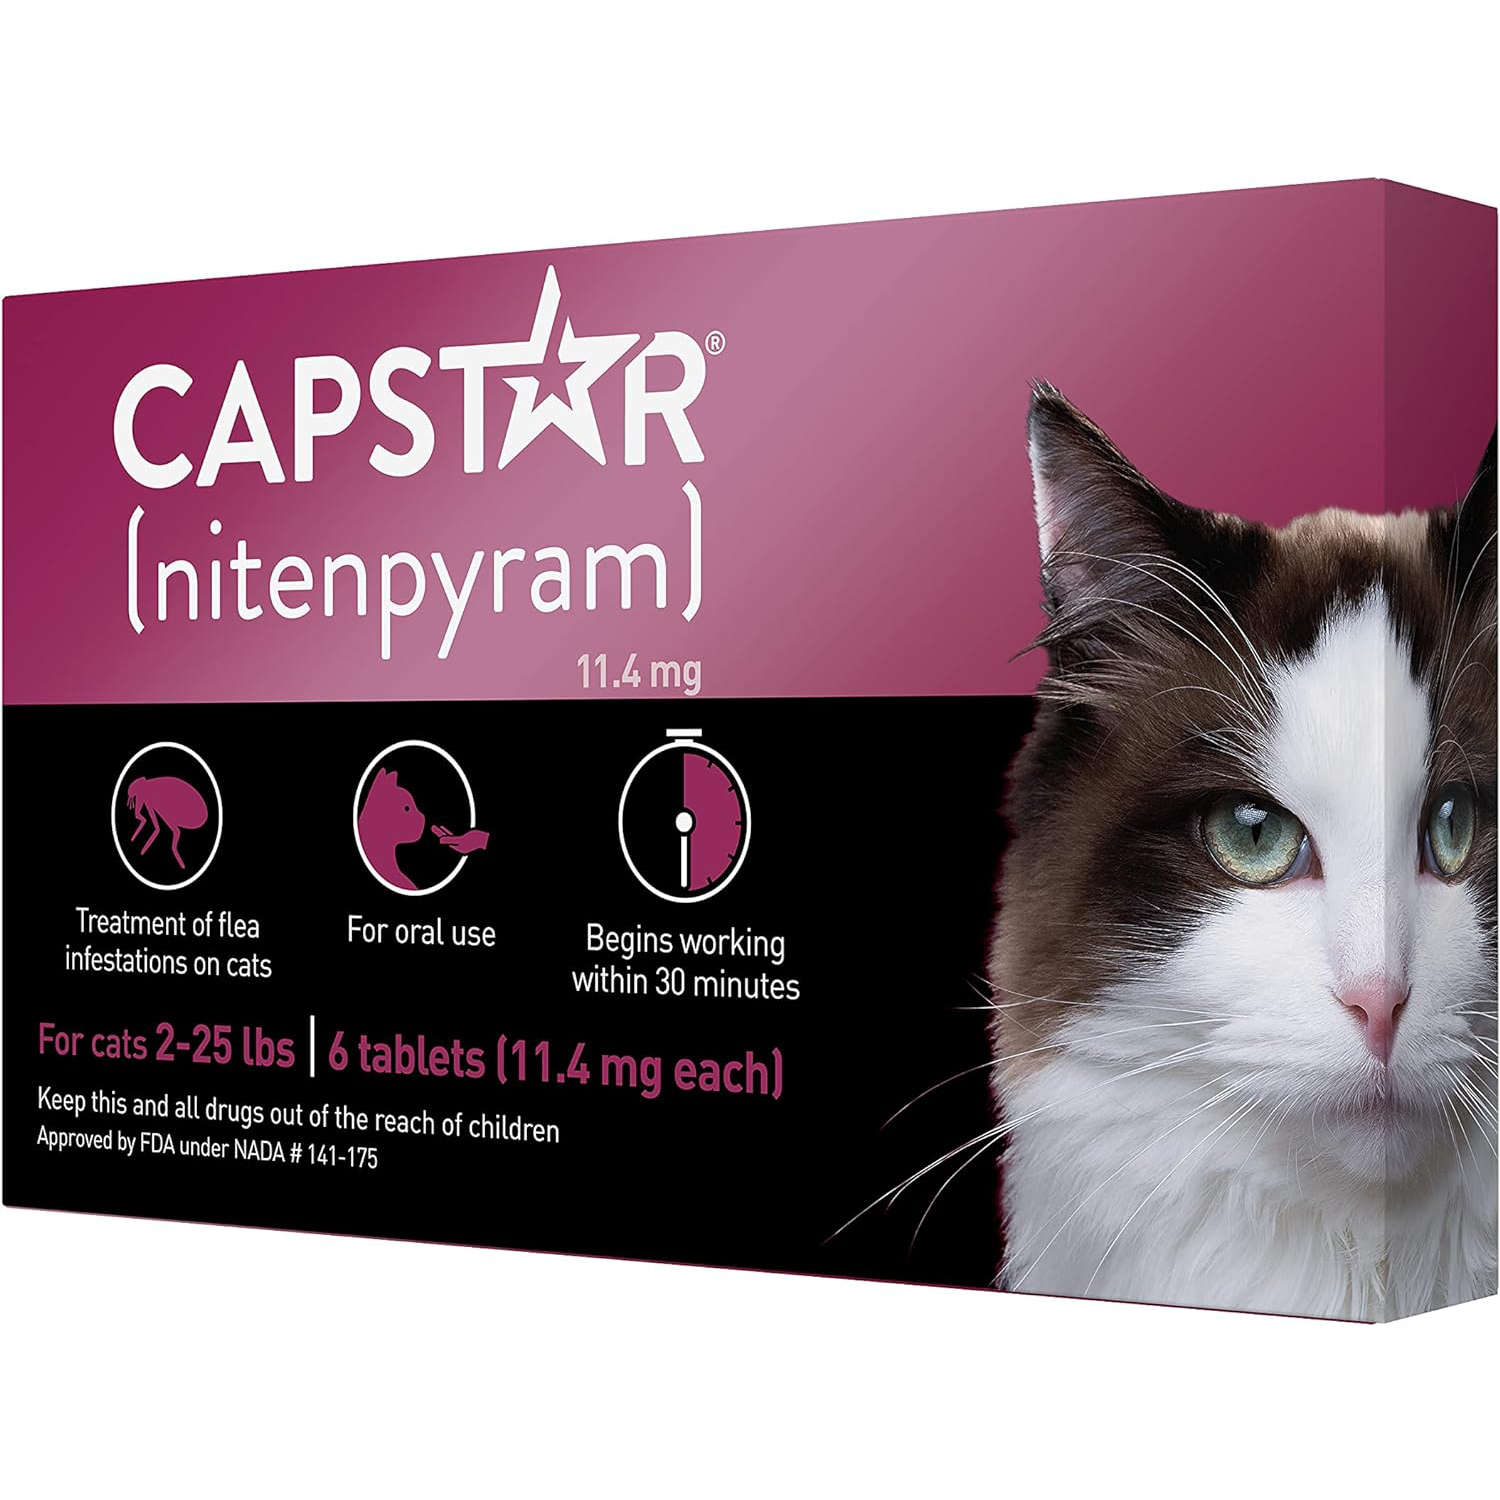 Capstar (nitenpyram) for Cats, Fast-Acting Oral Flea Treatment for Cats 2-25 lbs, Vet-Recommended Flea Medication Tablets Start Killing Fleas in 30 Minutes, 6 Doses new